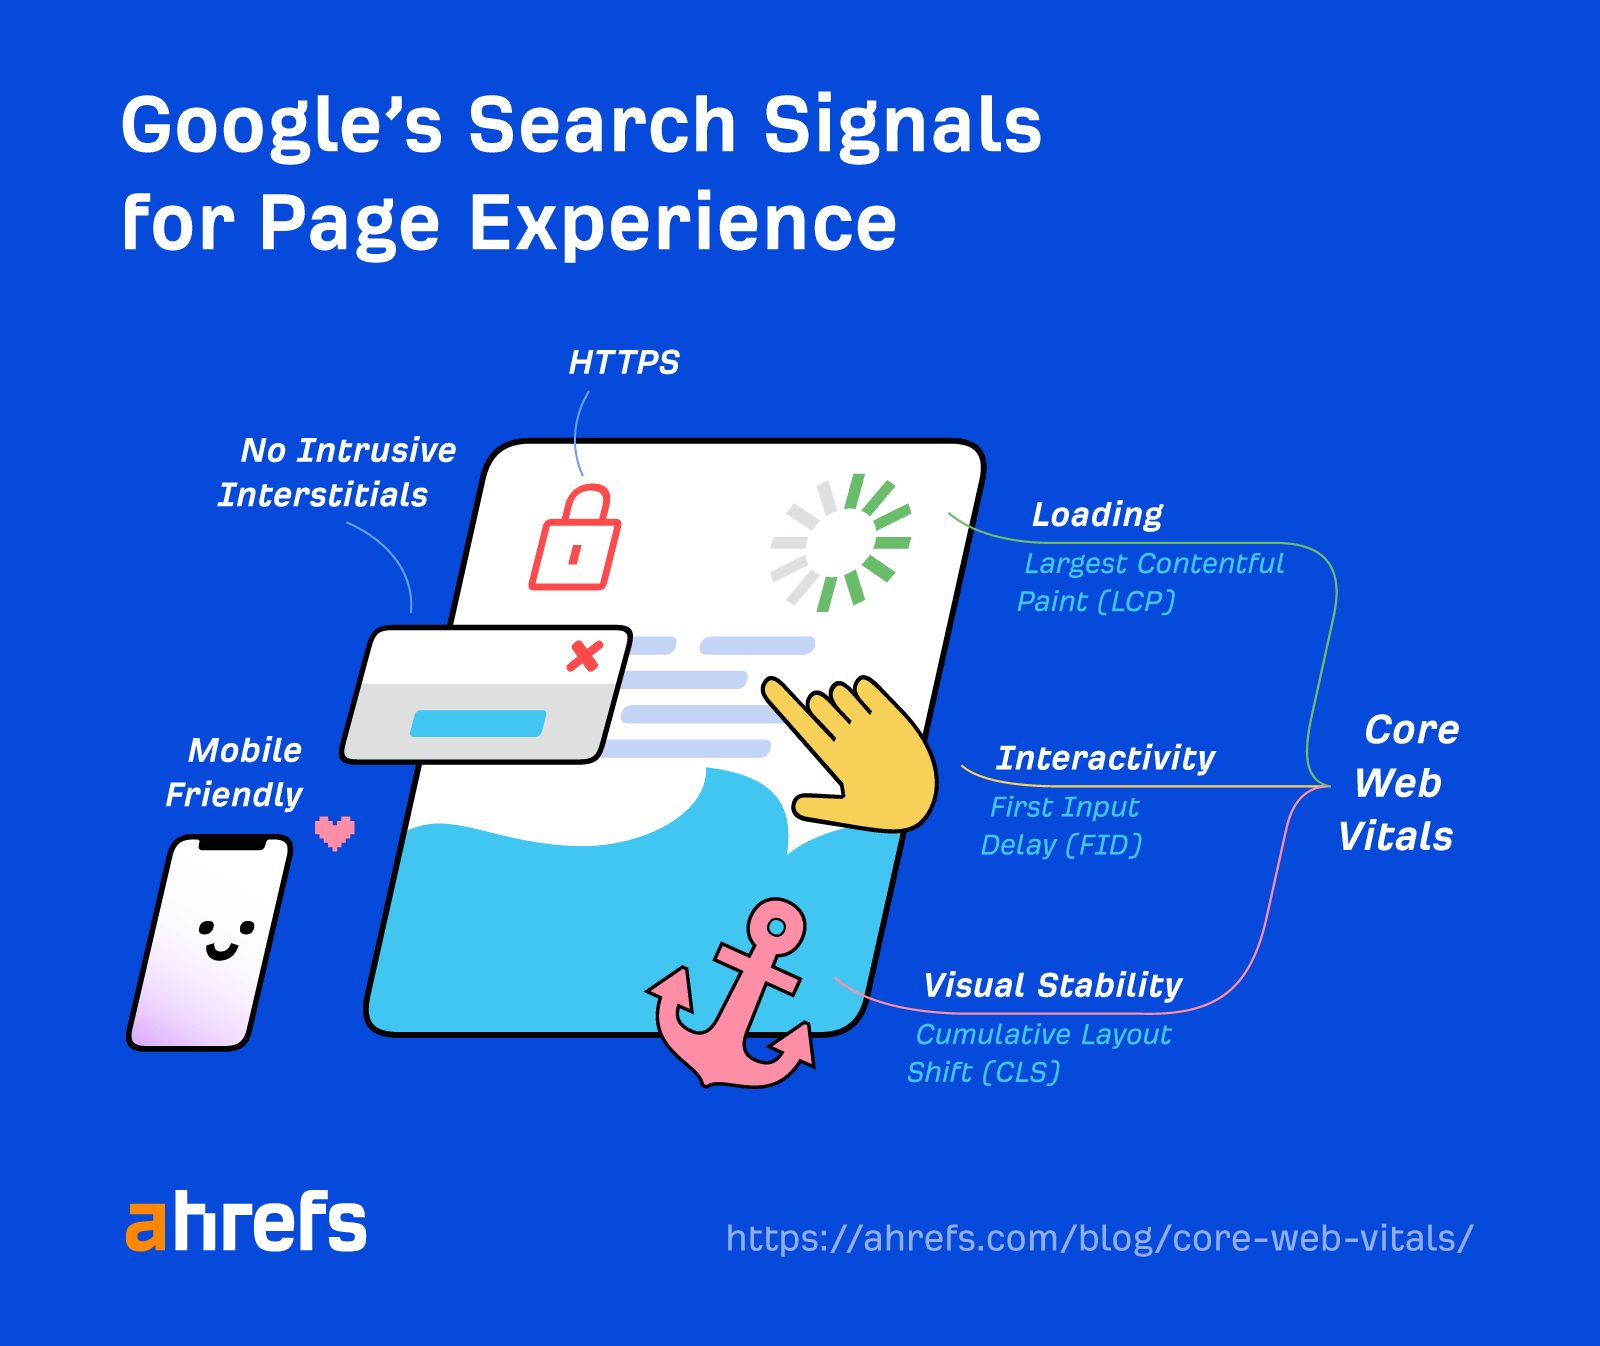 Google's Page Experience signals